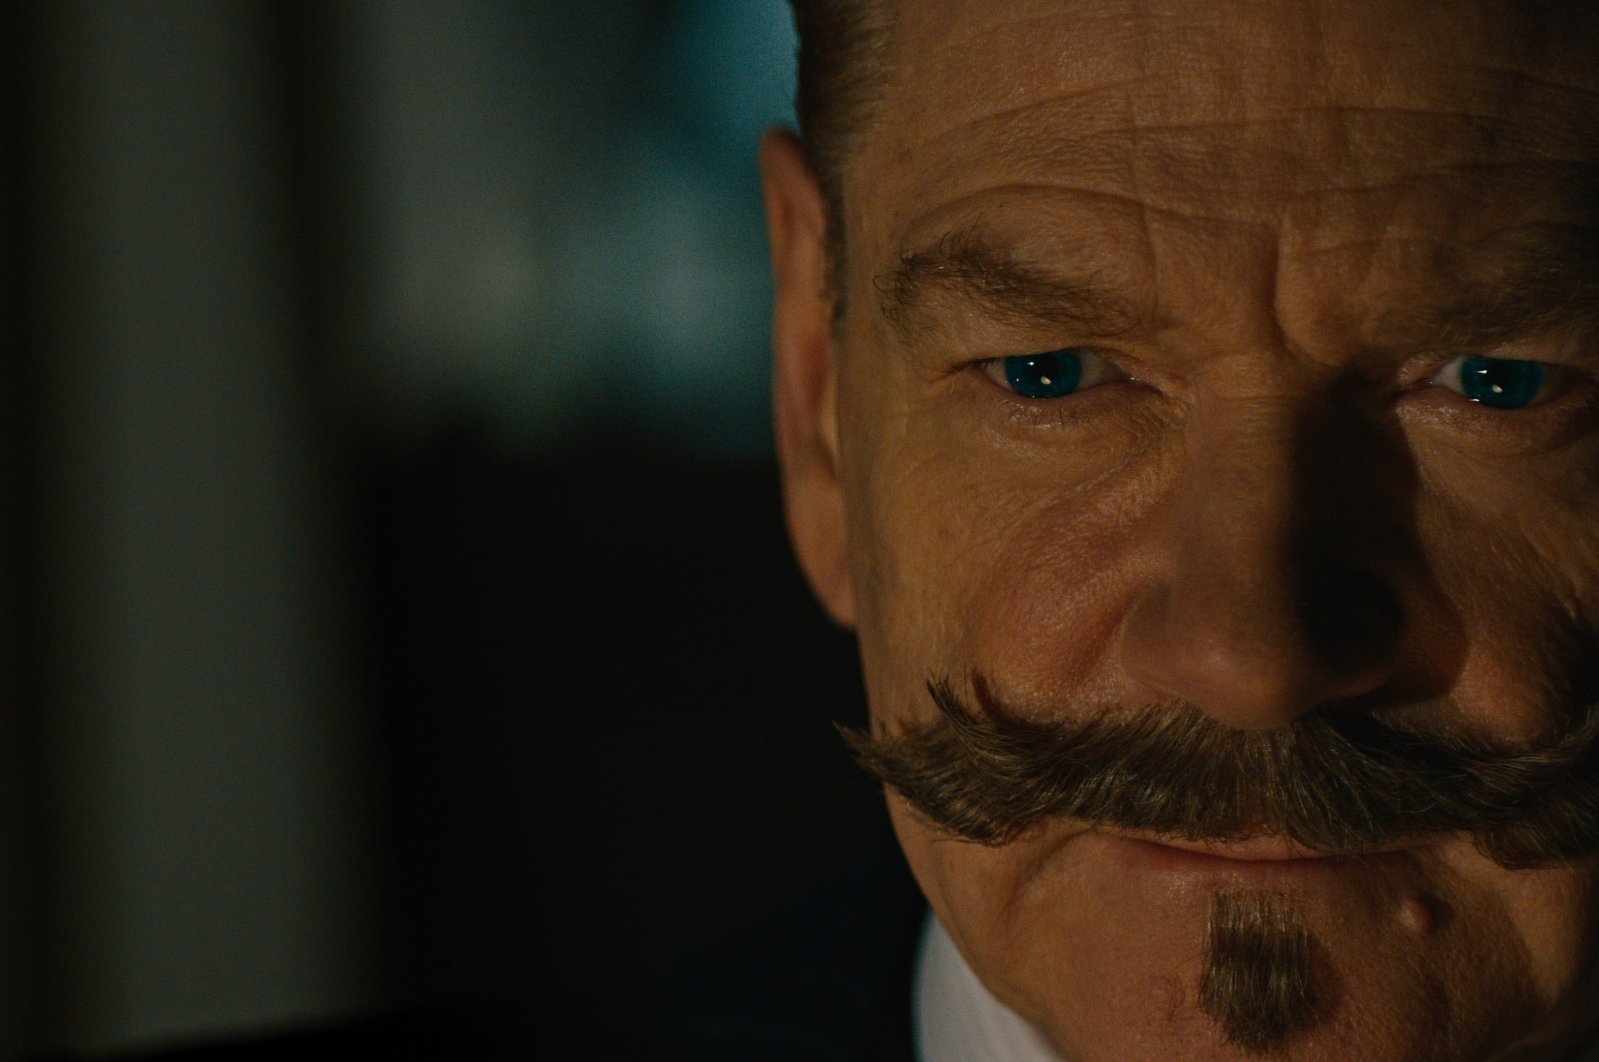 Poirot&#039;s mustache is back and once again wearing Kenneth Branagh. It&#039;s jump scares galore in the latest adaptation of Agatha Christie&#039;s detective books. (dpa Photo)